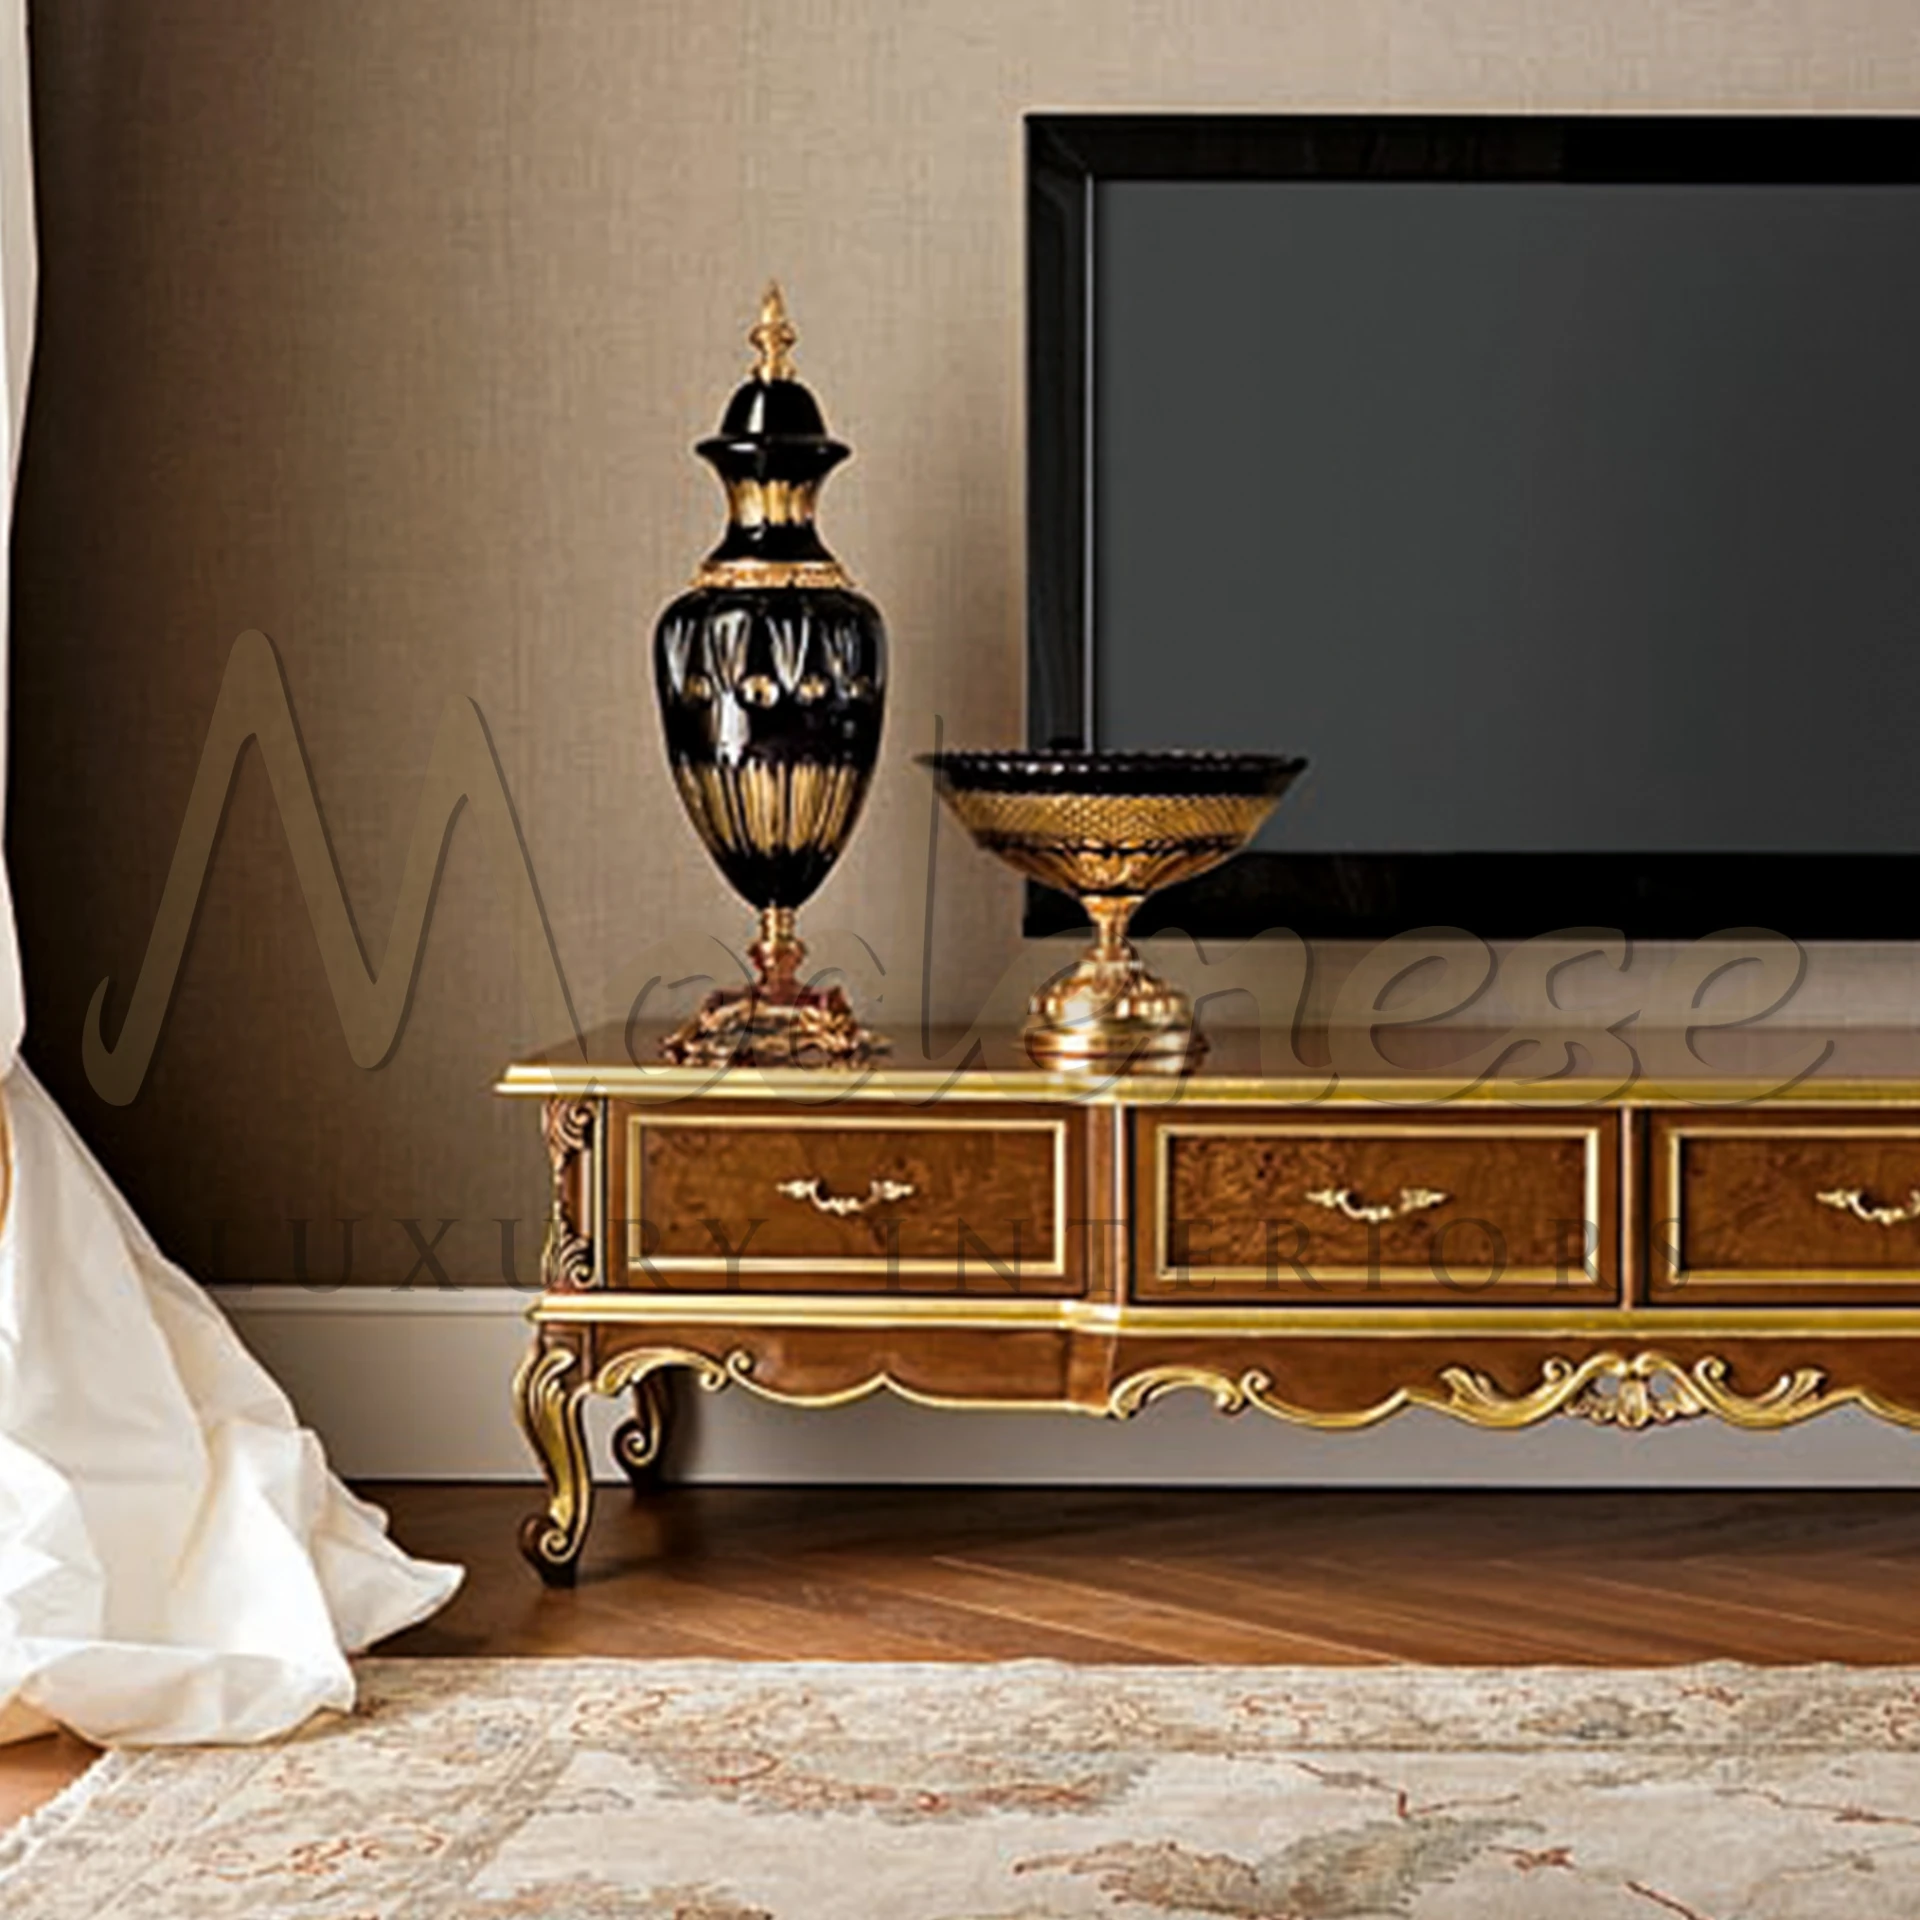 Classic furniture collection piece: Luxury TV Stand with precious carvings and Venetian design for sophisticated homes.